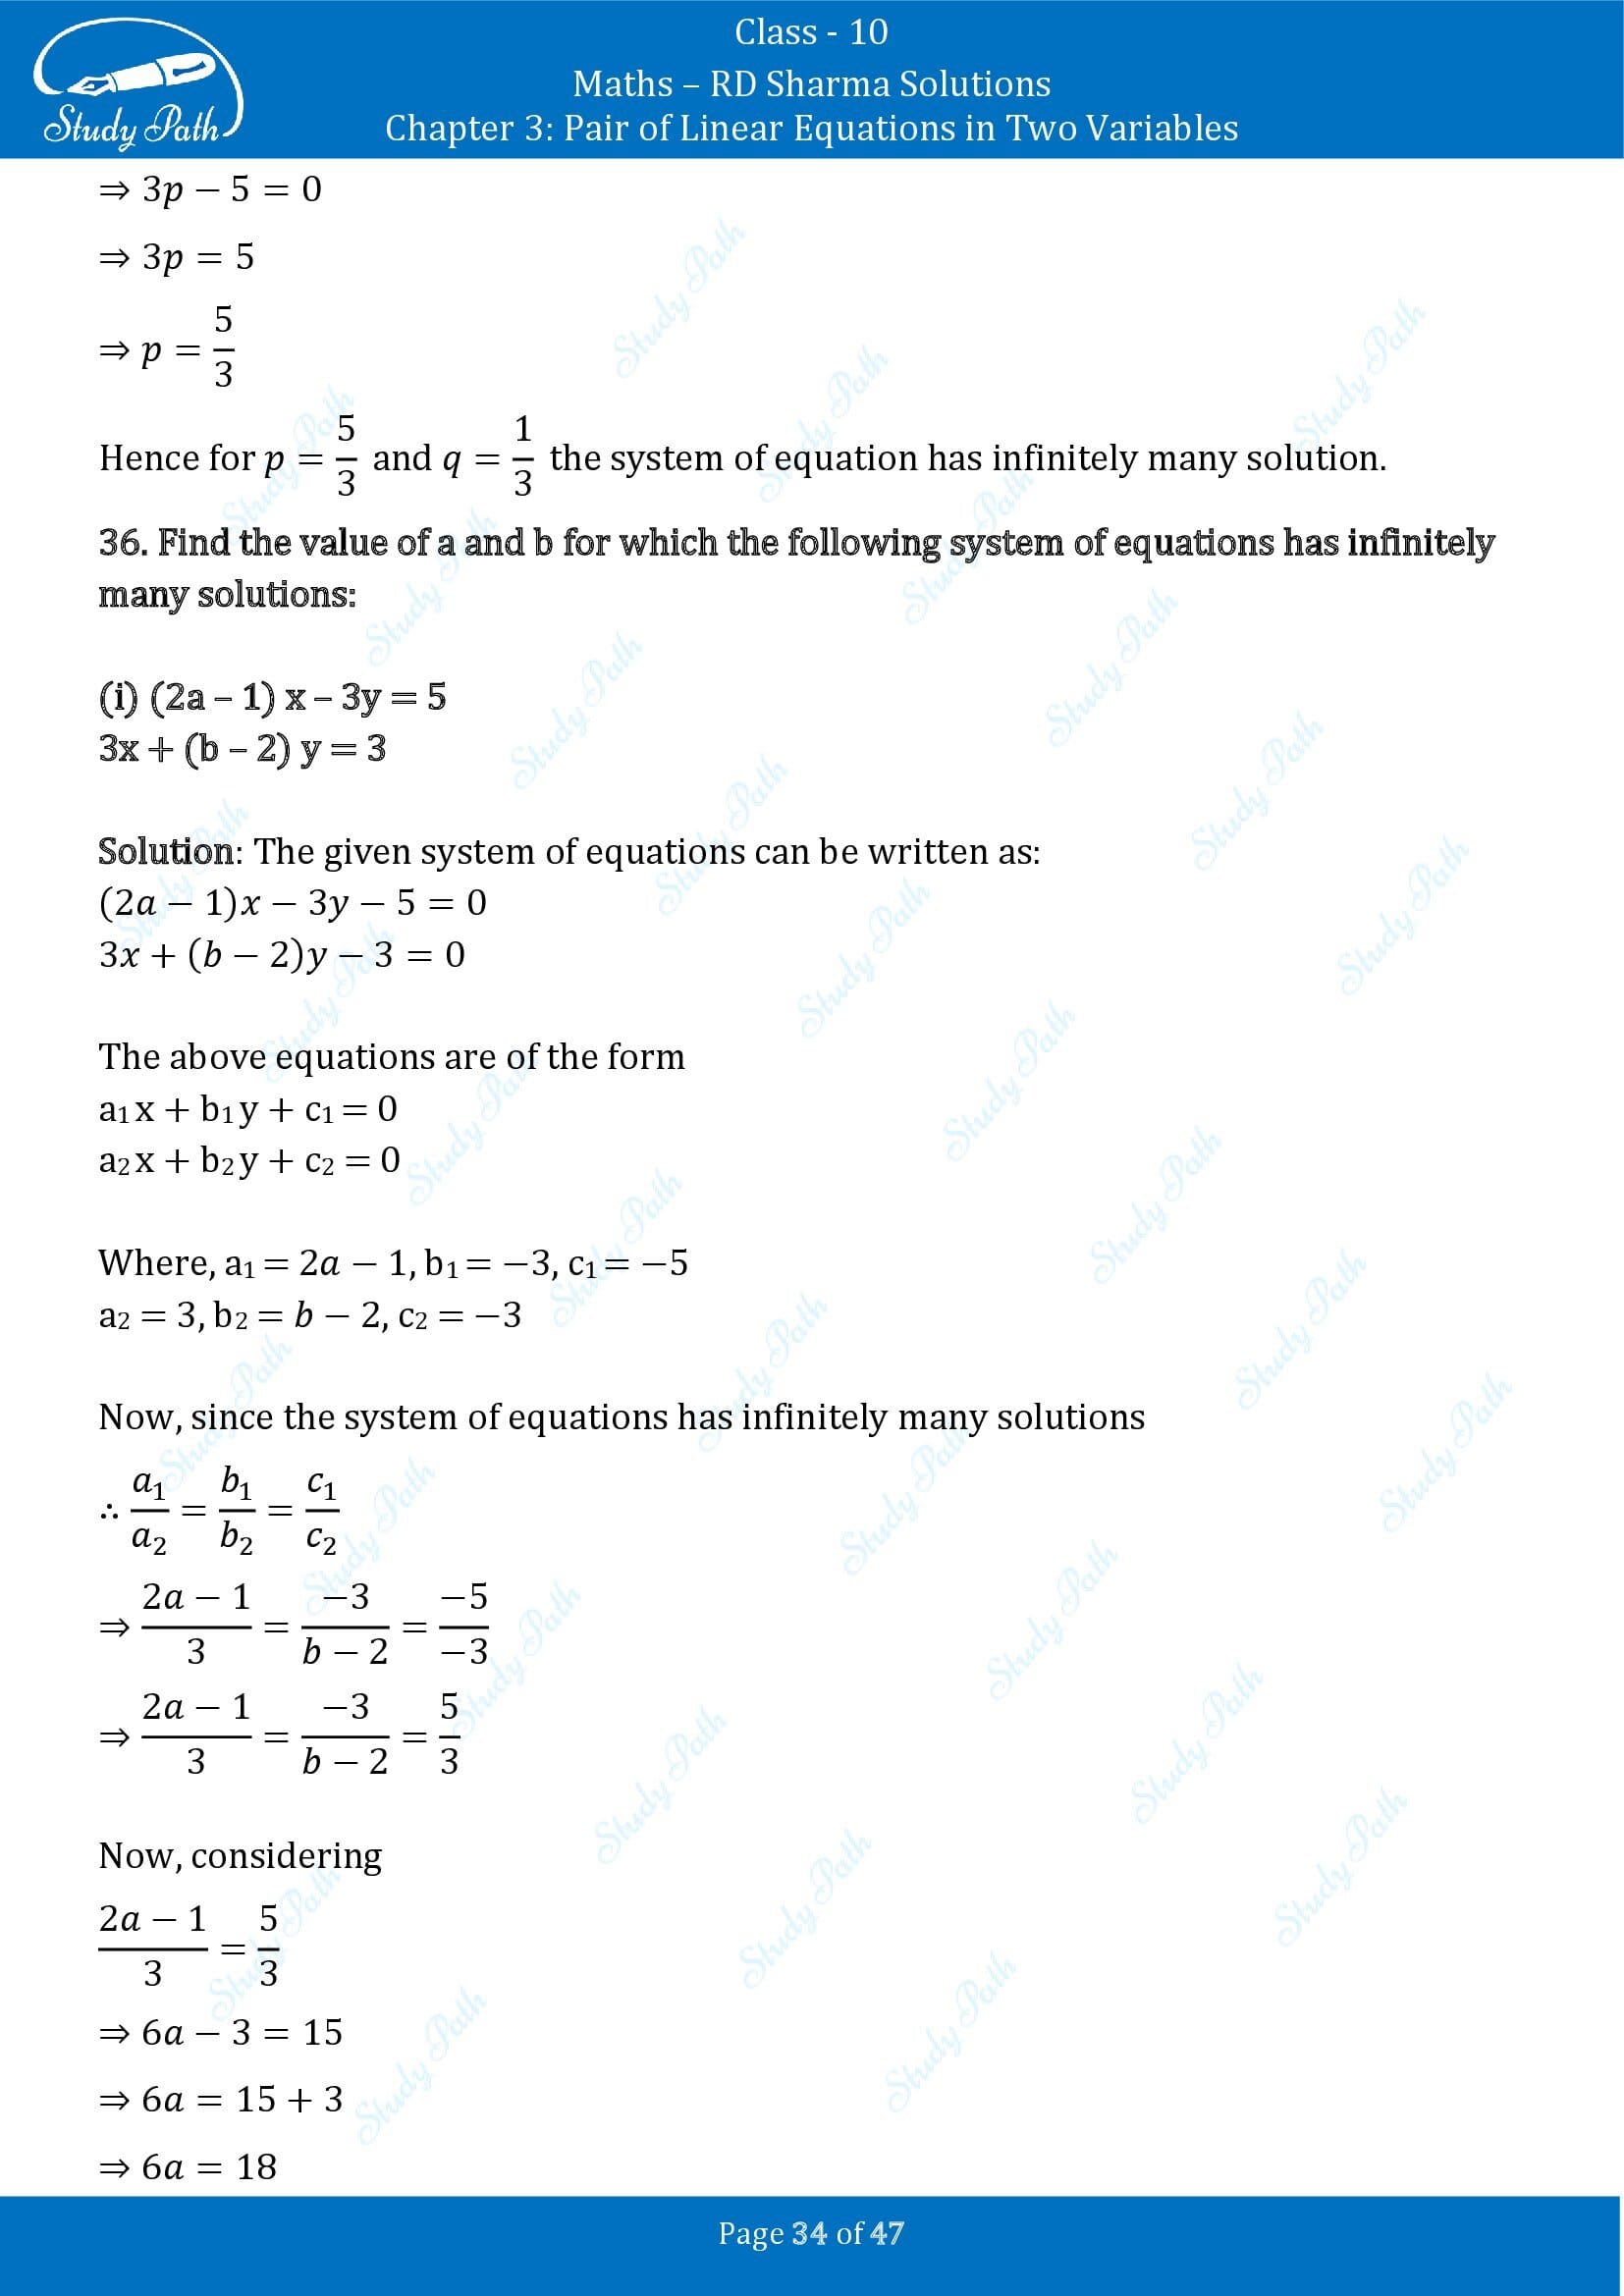 RD Sharma Solutions Class 10 Chapter 3 Pair of Linear Equations in Two Variables Exercise 3.5 00034